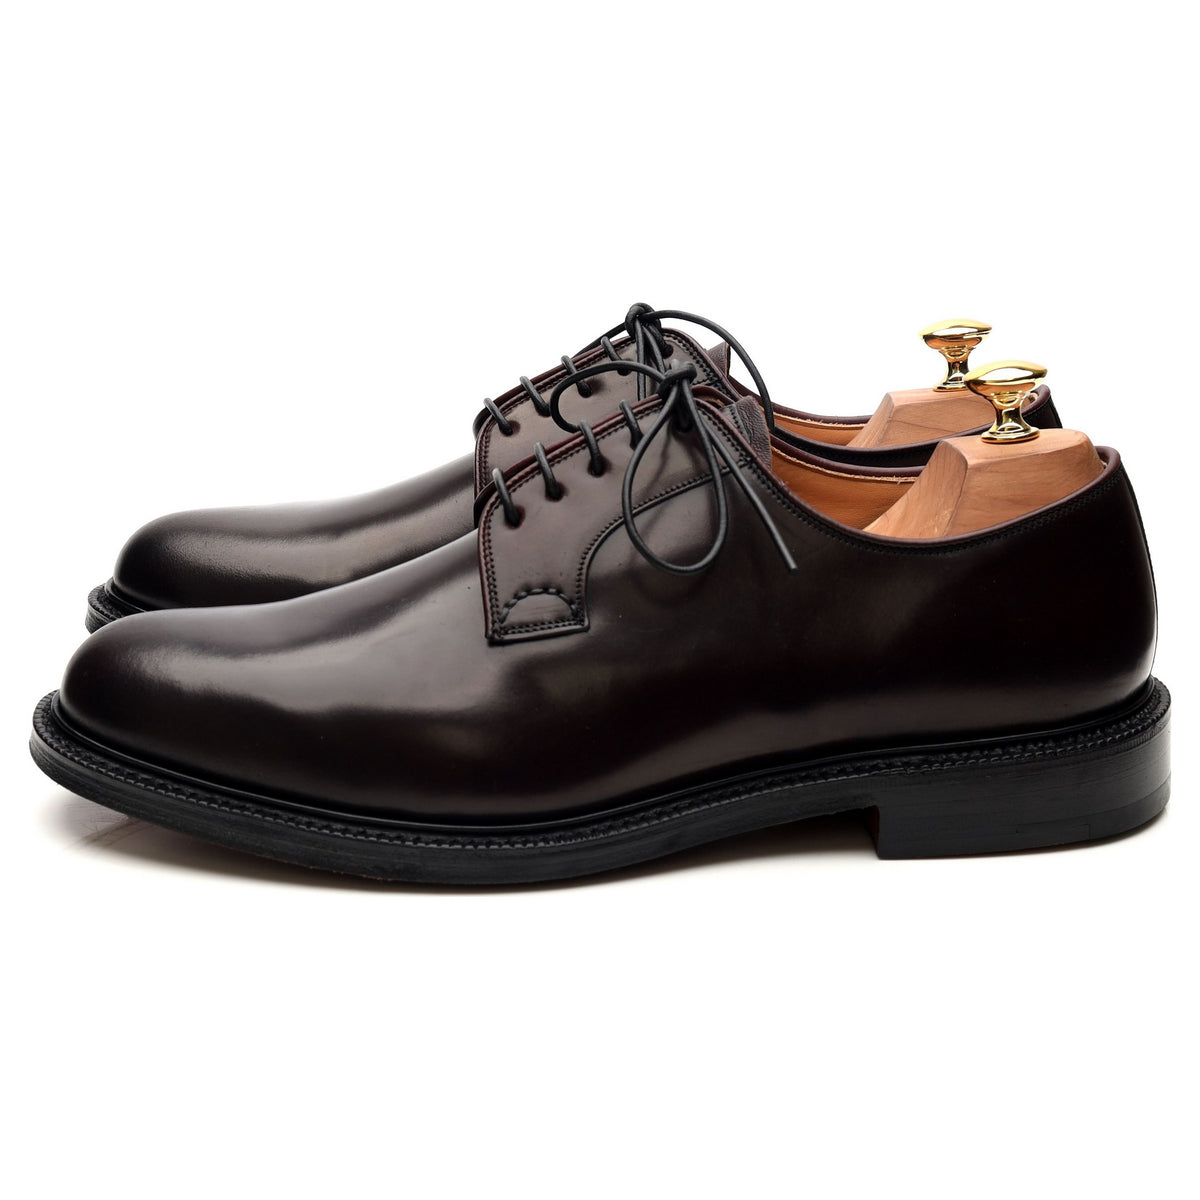 Shannon' Burgundy Cordovan Leather Derby UK 9.5 F - Abbot's Shoes